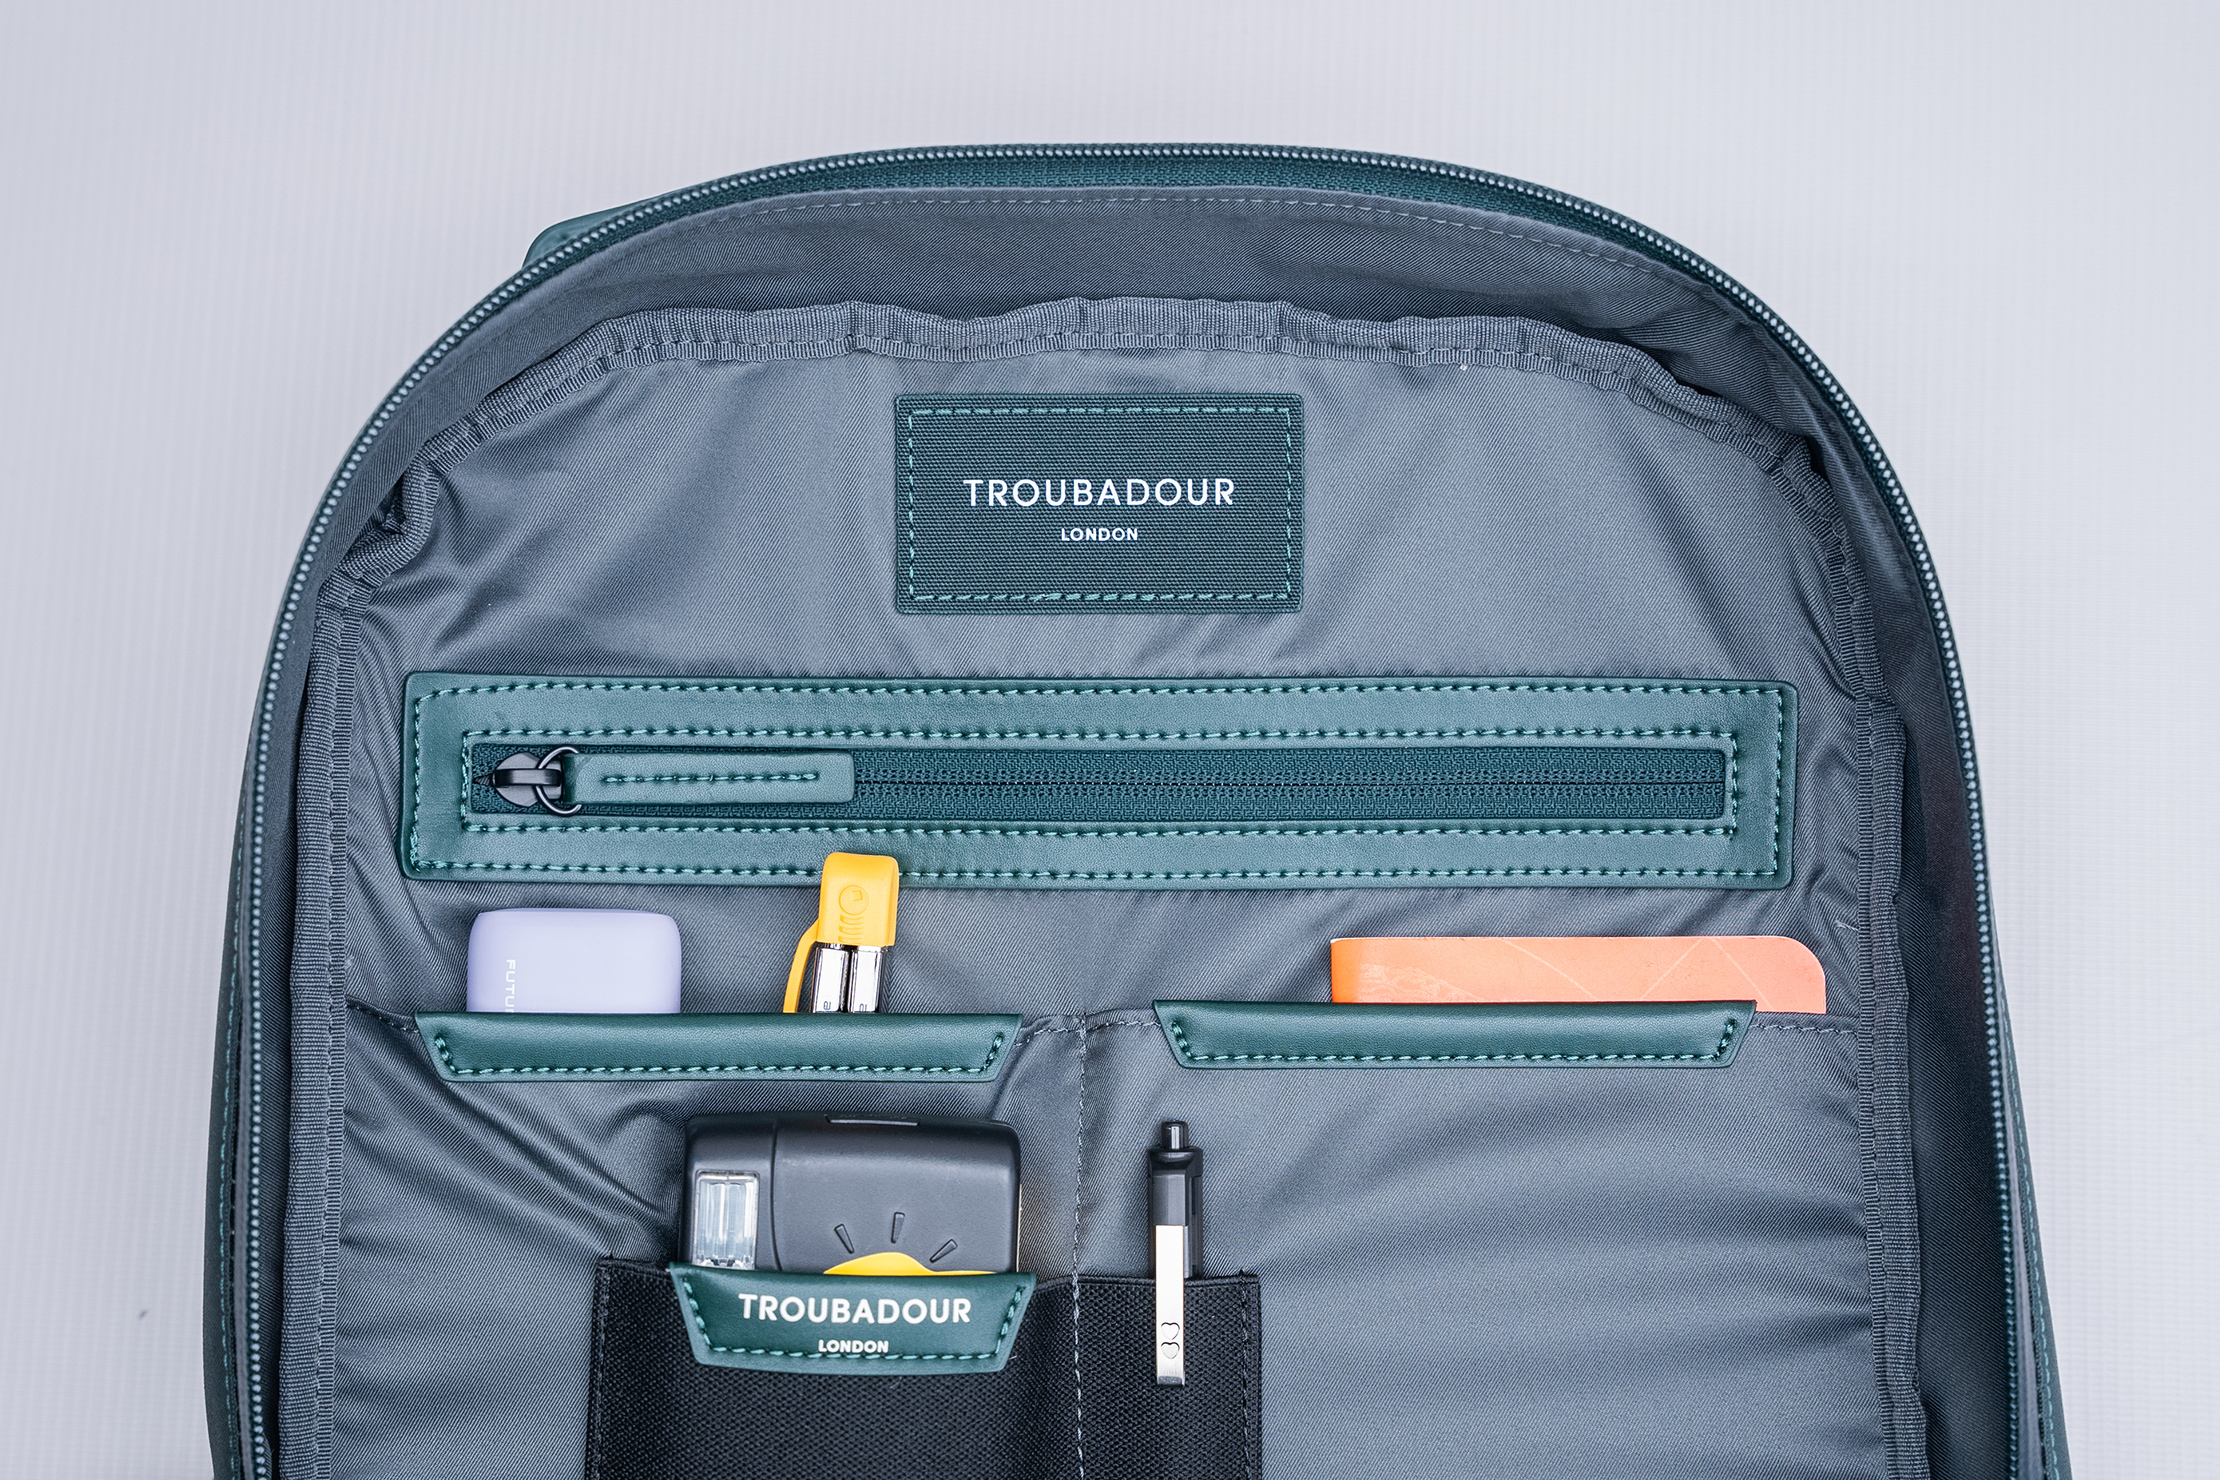 How many compartments does the Troubadour Apex Backpack have?